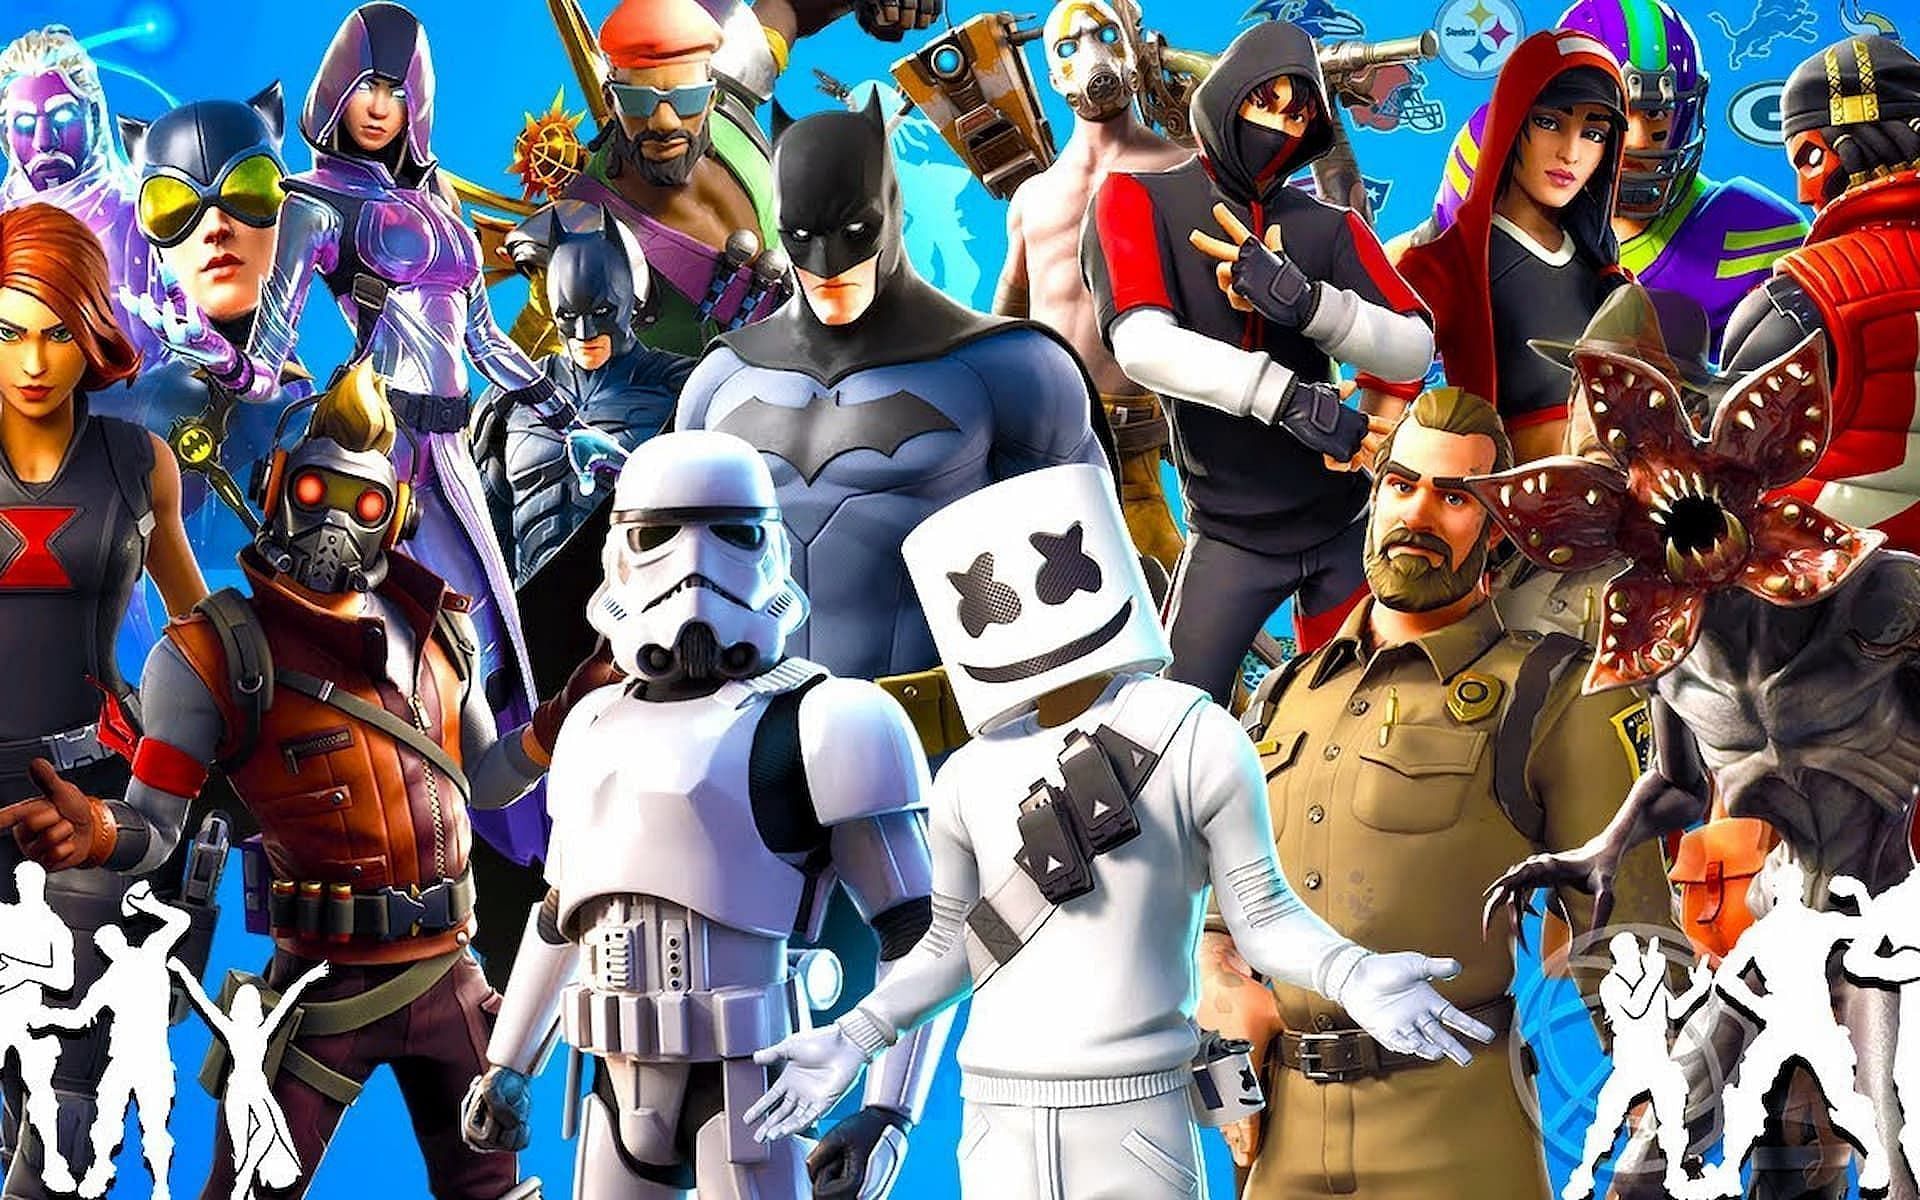 Are Fortnite crossover skins starting to get overwhelming?